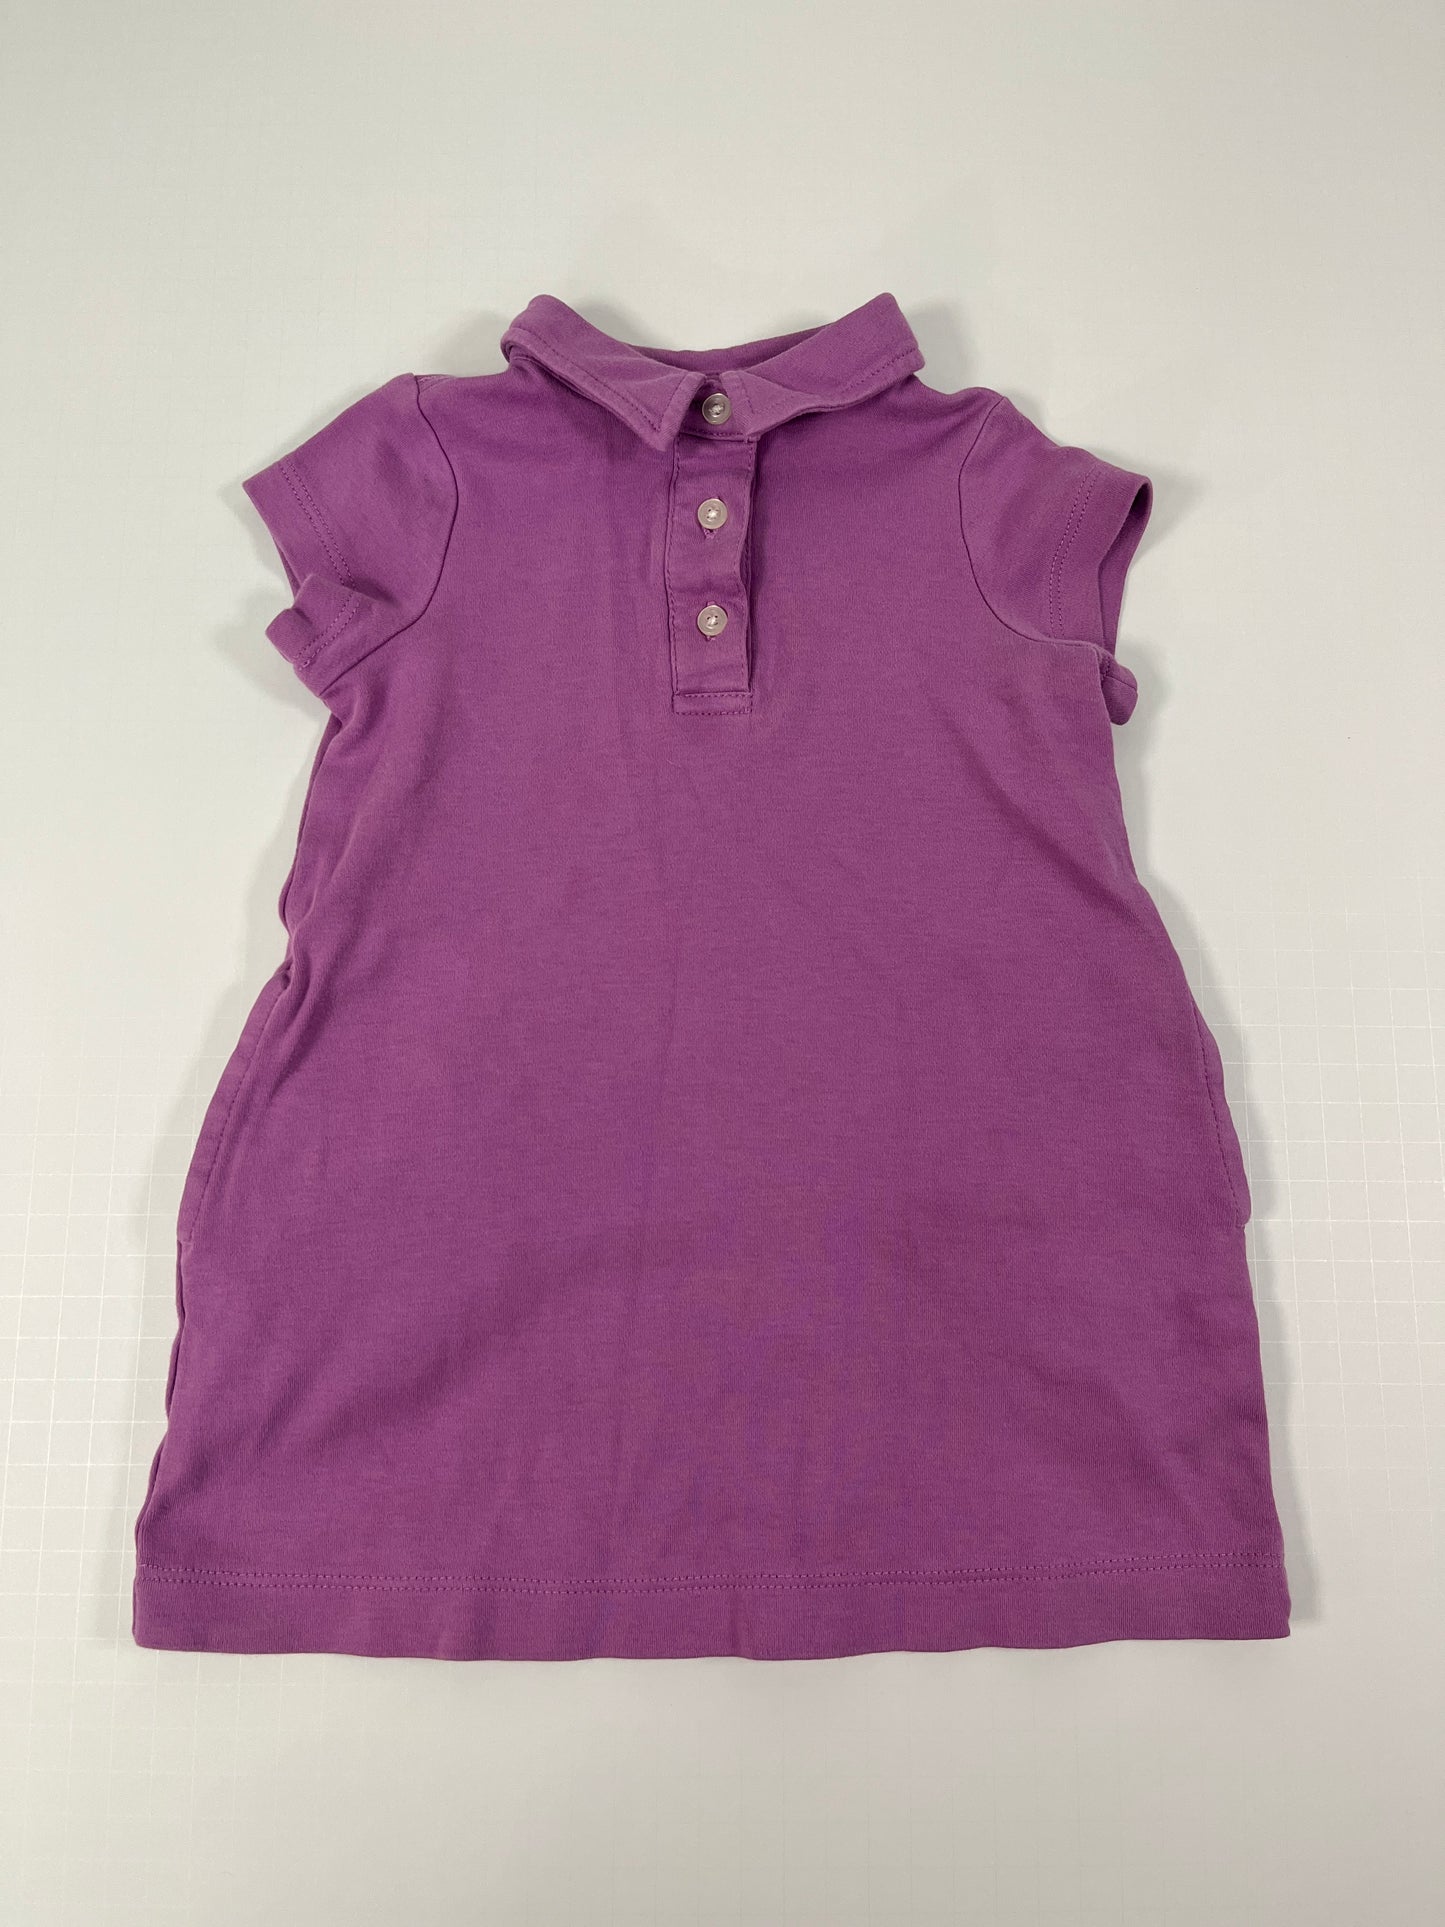 PPU 45242 2T girls Primary brand purple polo dress with pockets